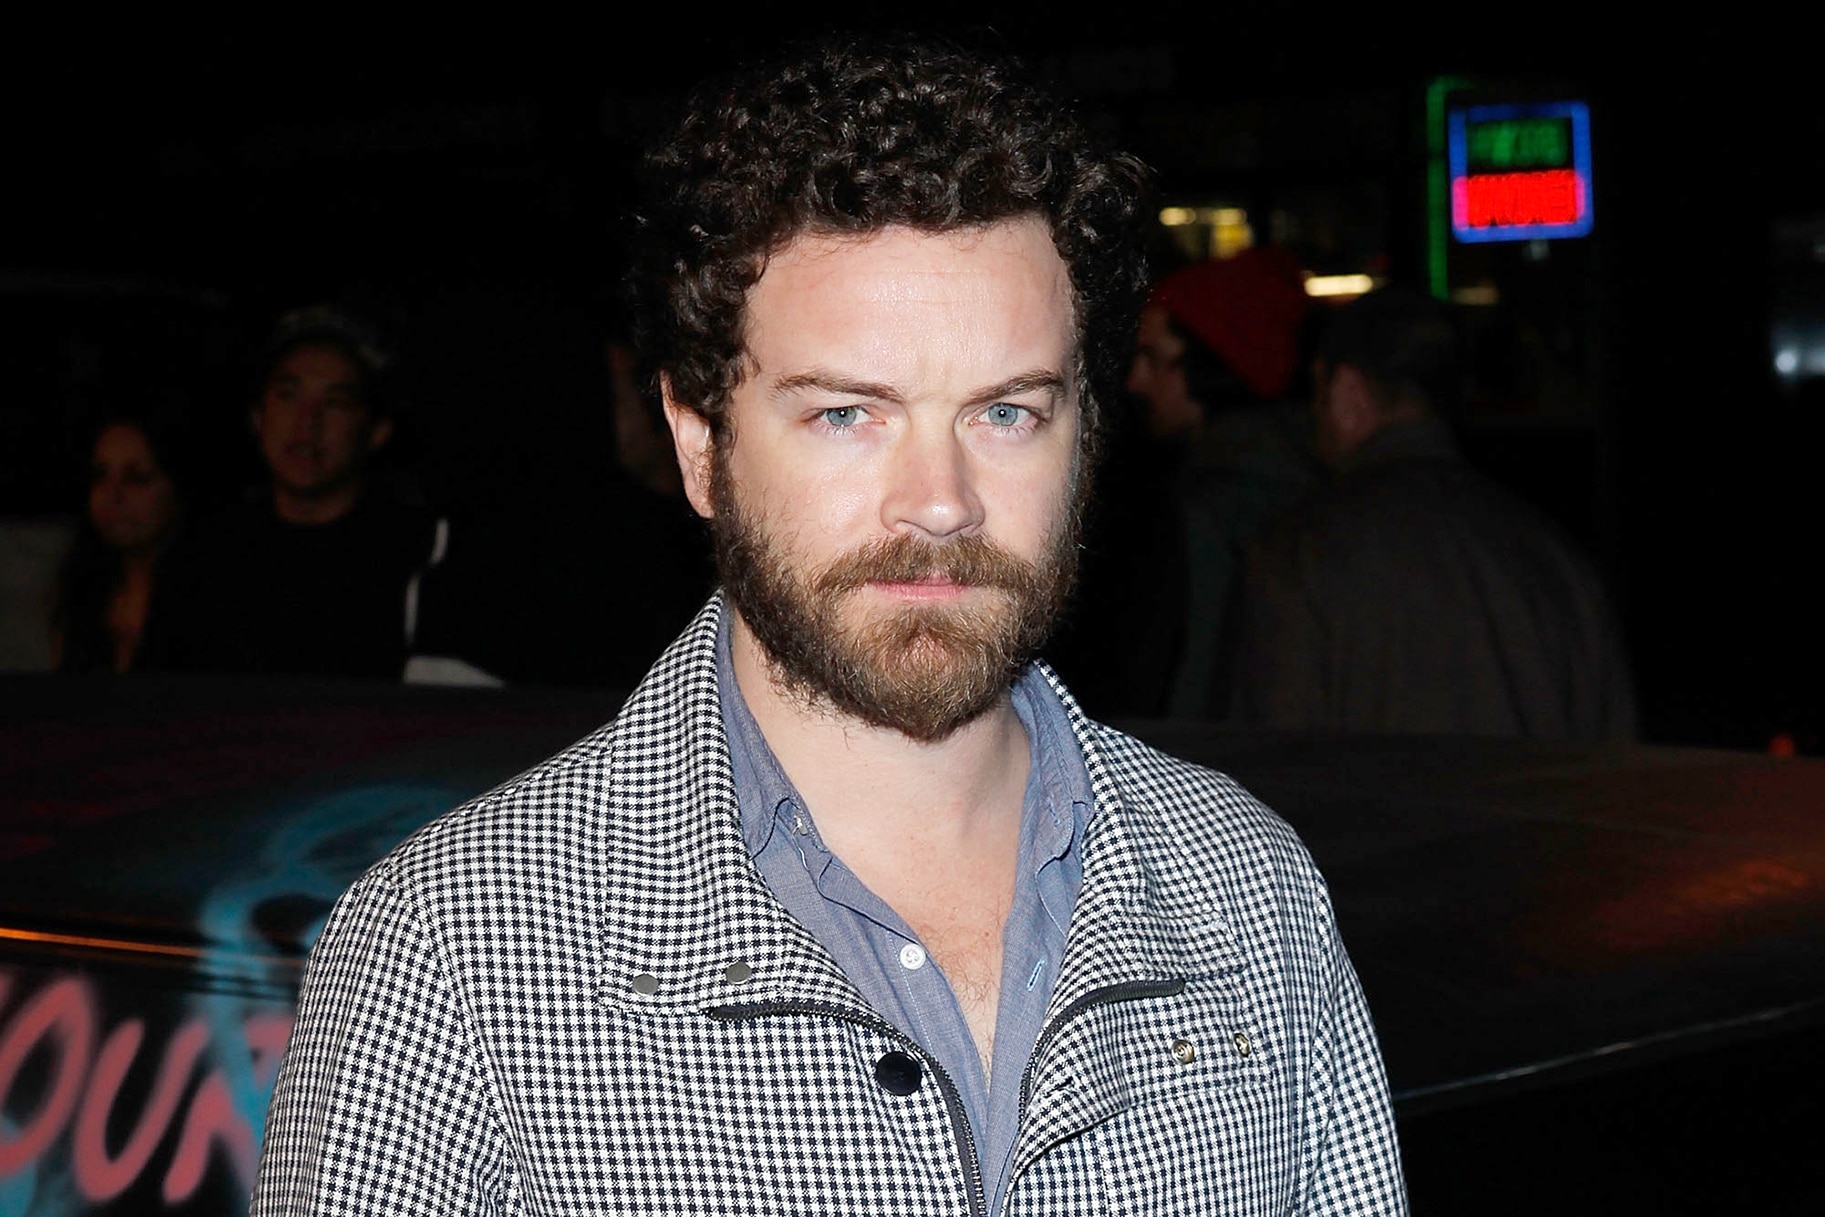 Danny Masterson wearing a black and white jacket starring into the camera